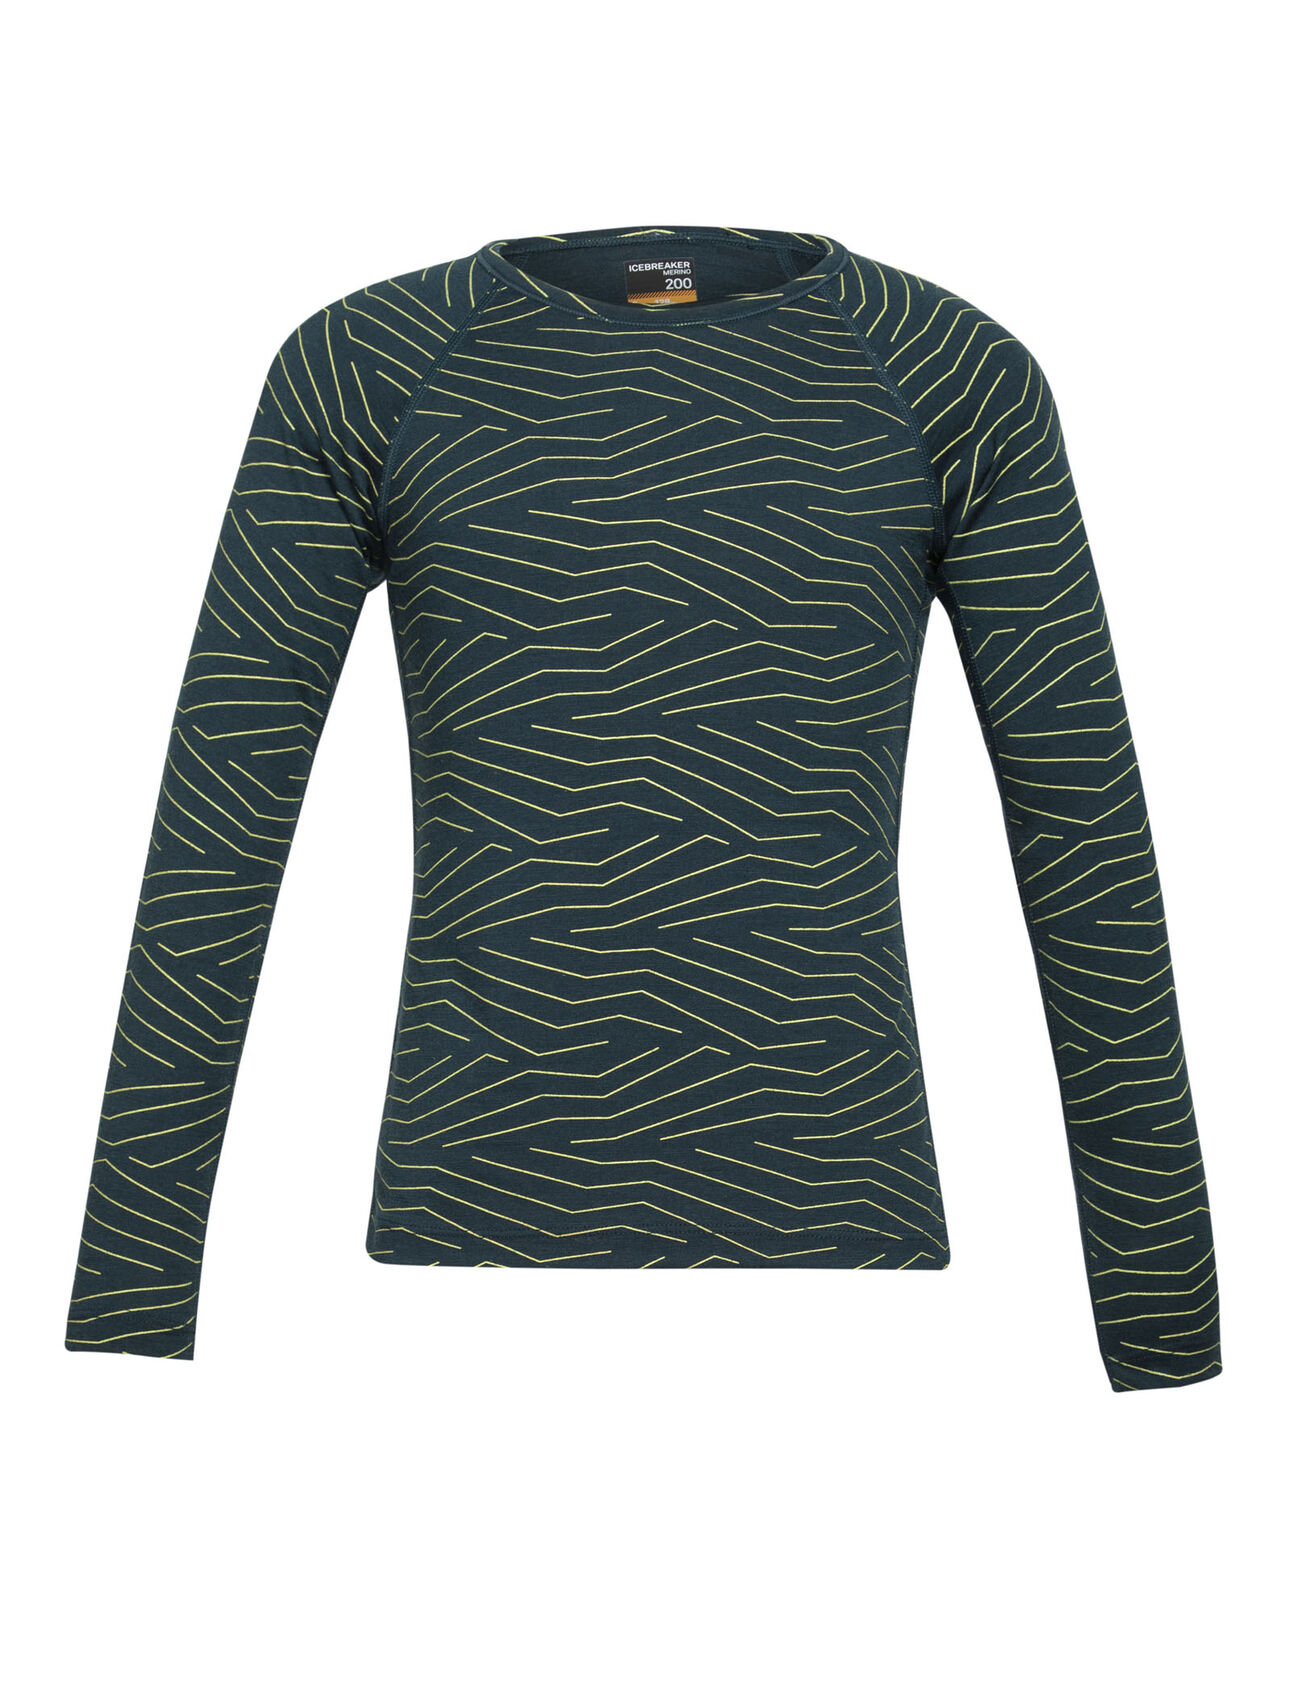 Kids Merino 200 Oasis Long Sleeve Crewe Thermal Top Napasoq Lines Perfect for cold-weather warmth or everyday layering, the 200 Oasis Long Sleeve Crewe Napasoq Lines is made with naturally soft and breathable 100% merino wool.